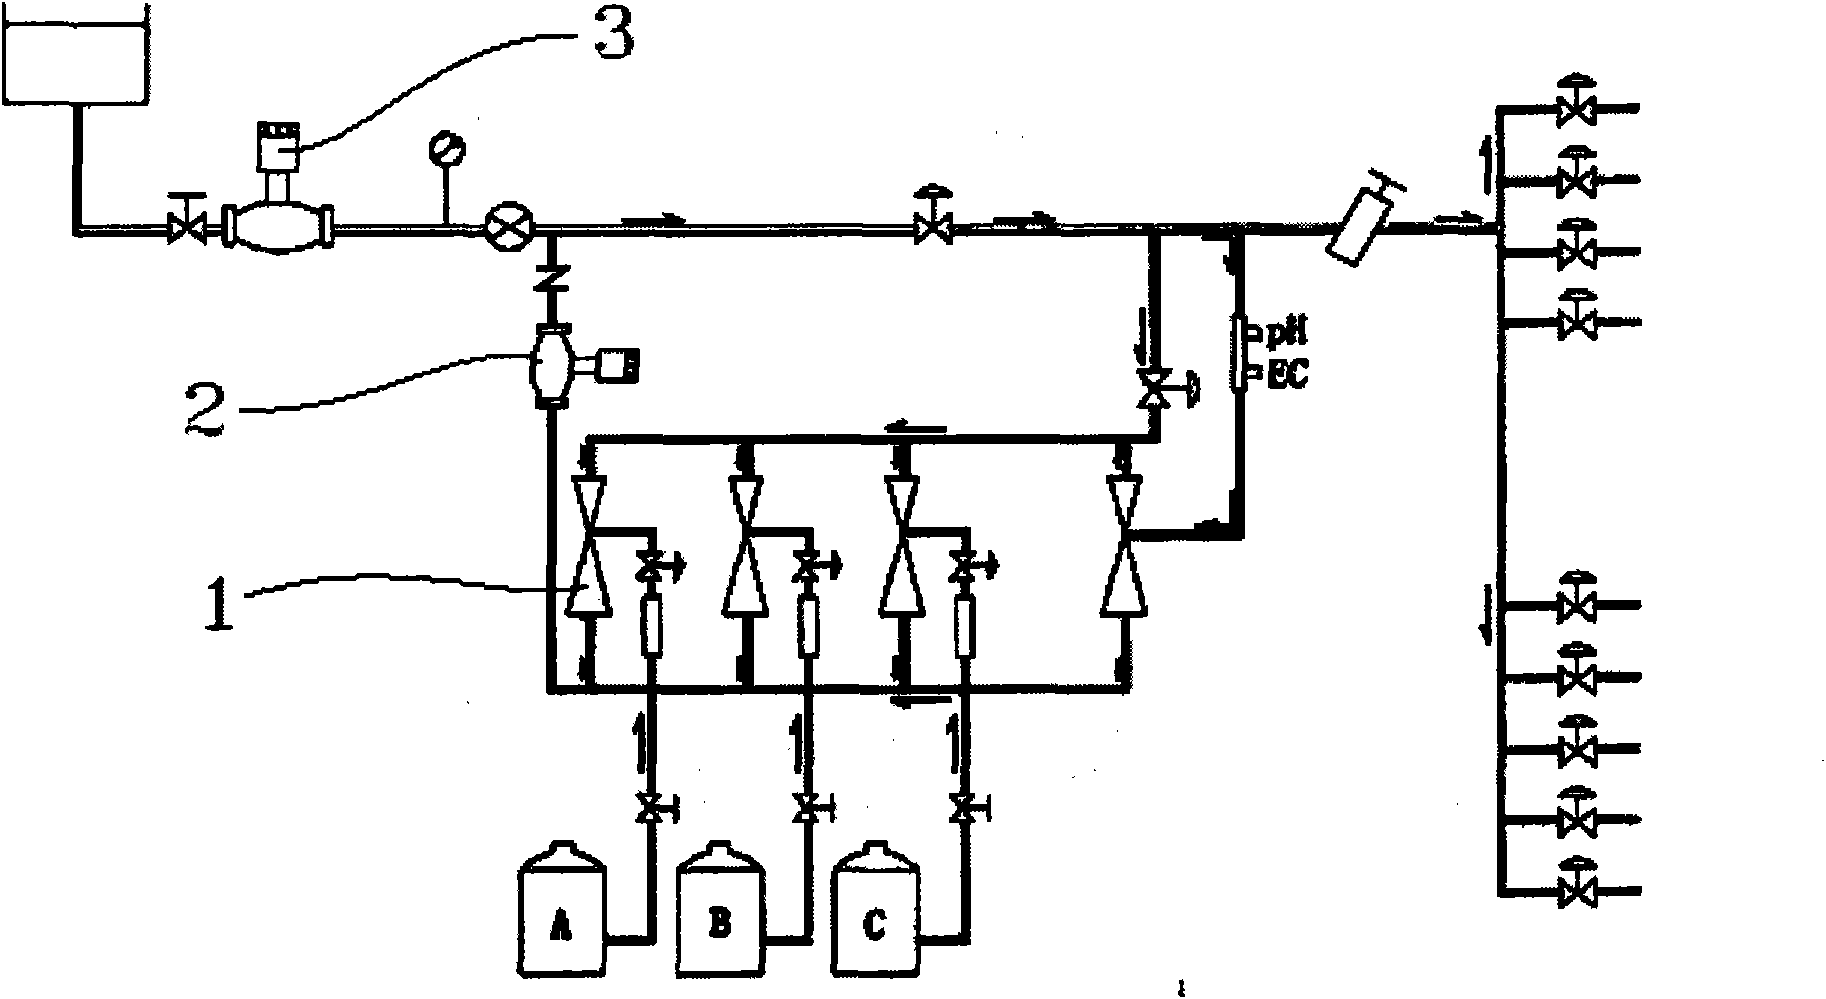 Accurate drip irrigation and fertilization system